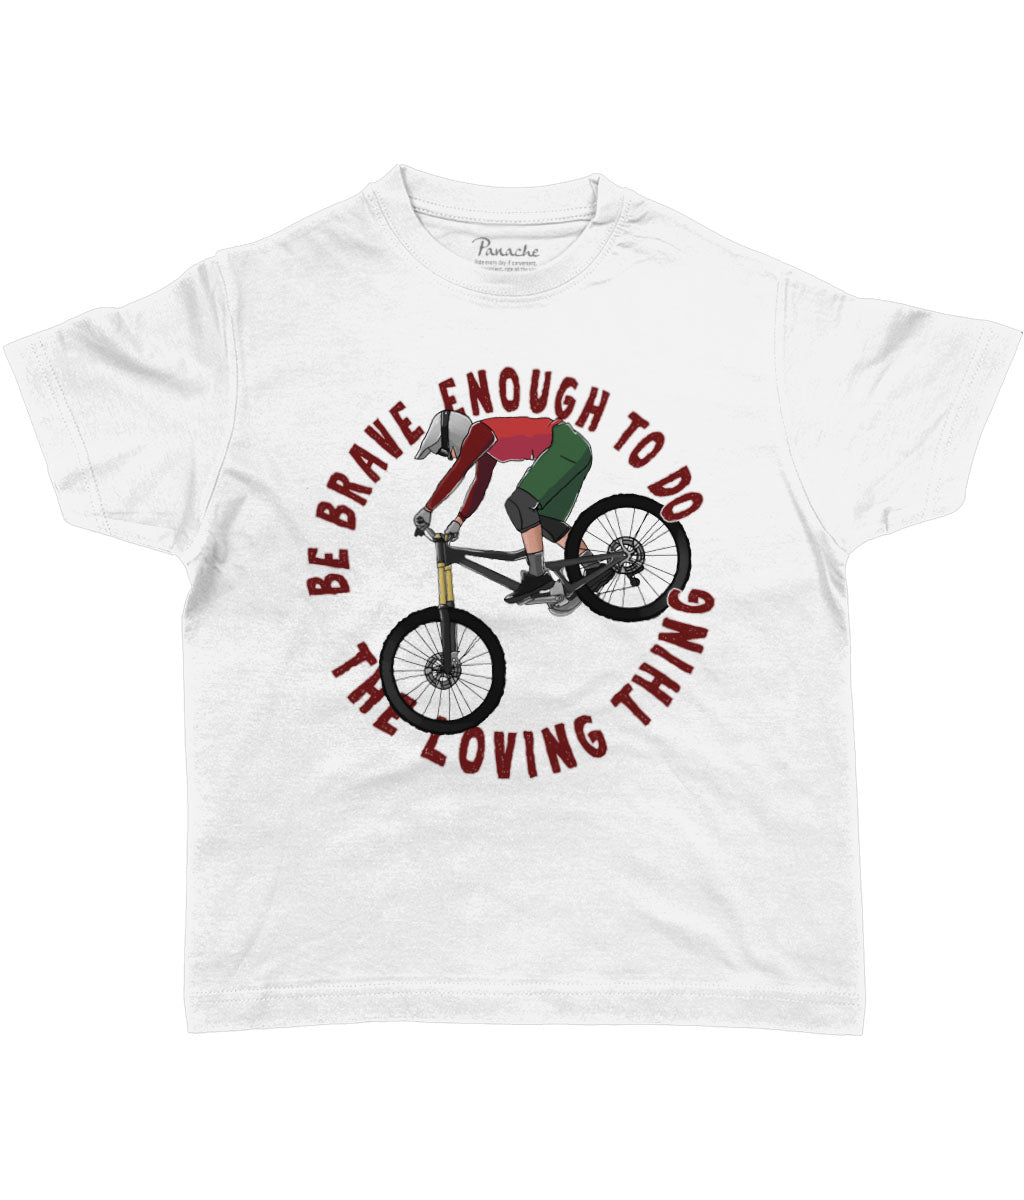 Be Brave Enough to do the Loving Thing Kids Cycling T-shirt White